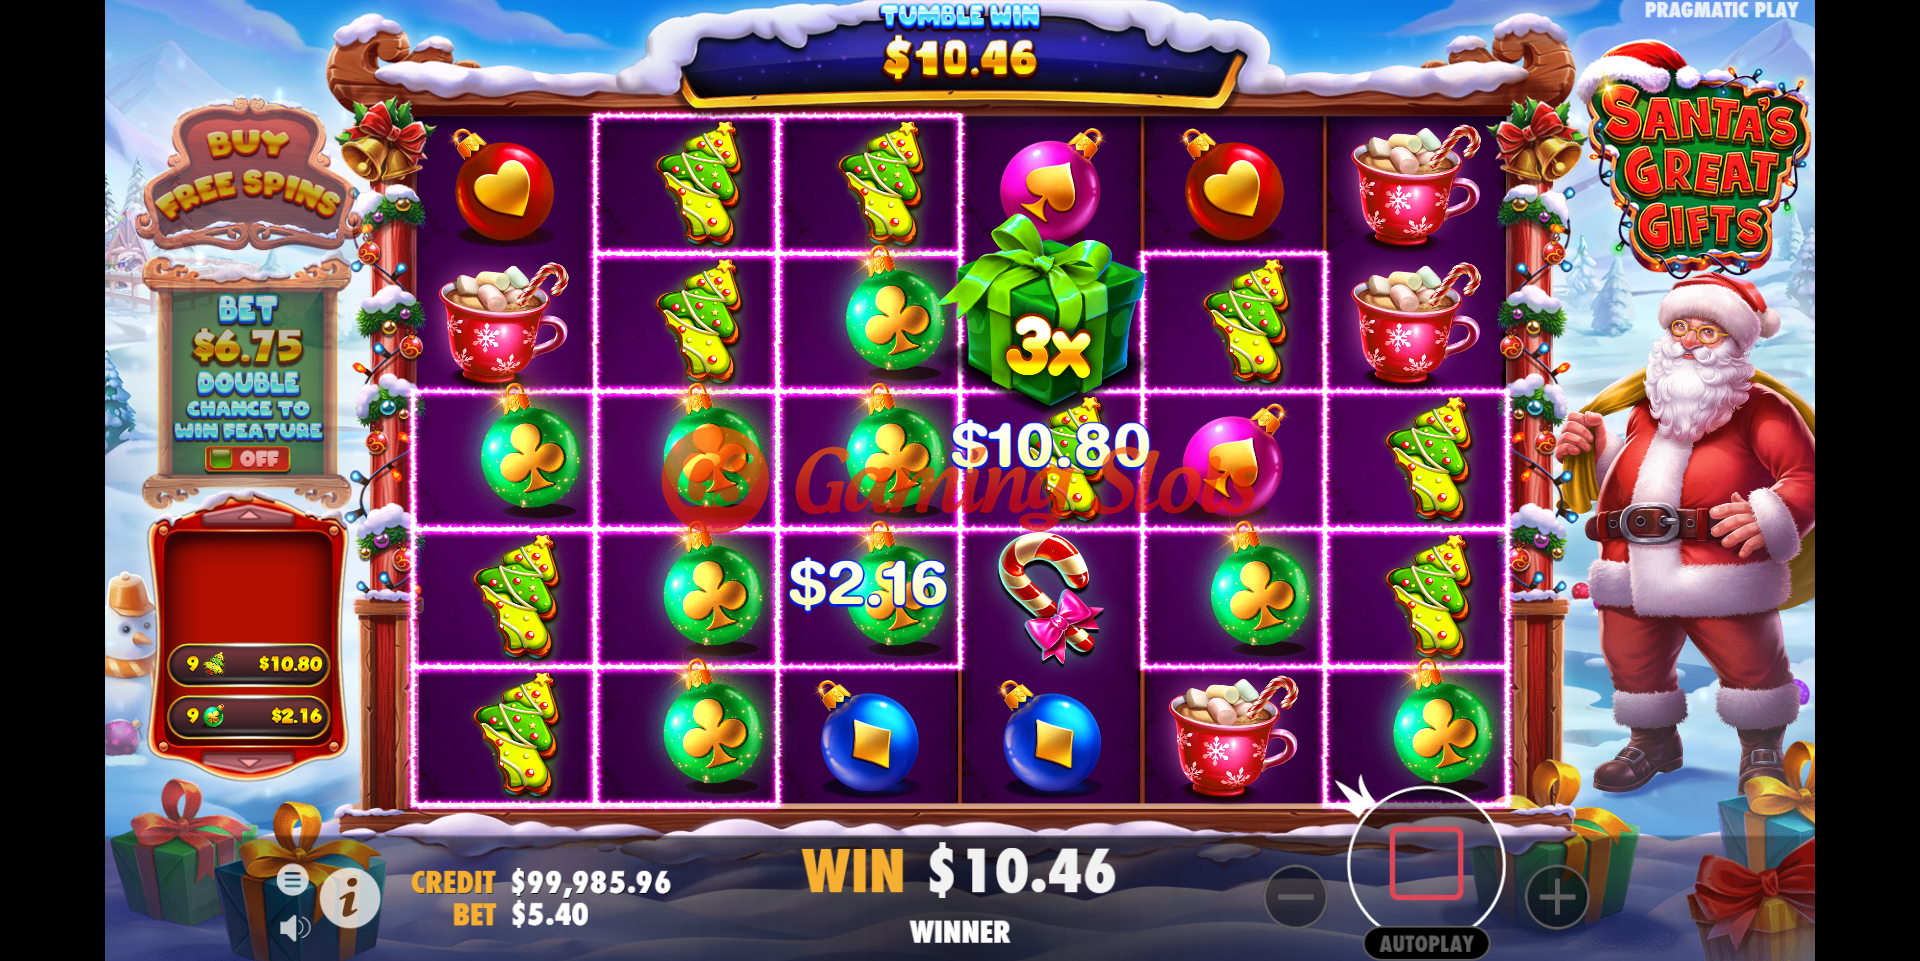 Base Game for Santa's Great Gifts slot from Pragmatic Play